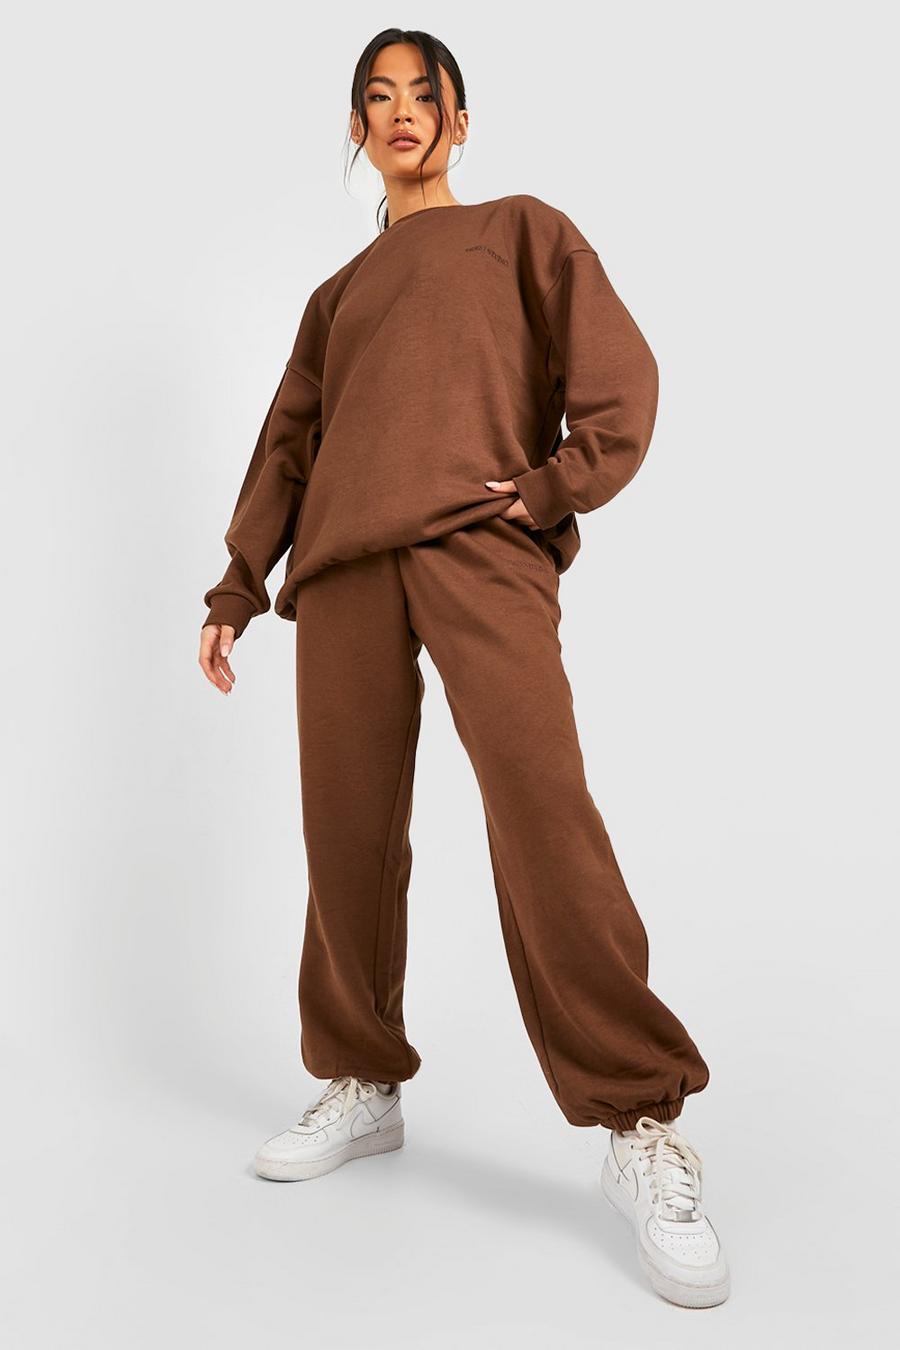 Chocolate brown Slogan Embroidered Oversized Sweater Tracksuit